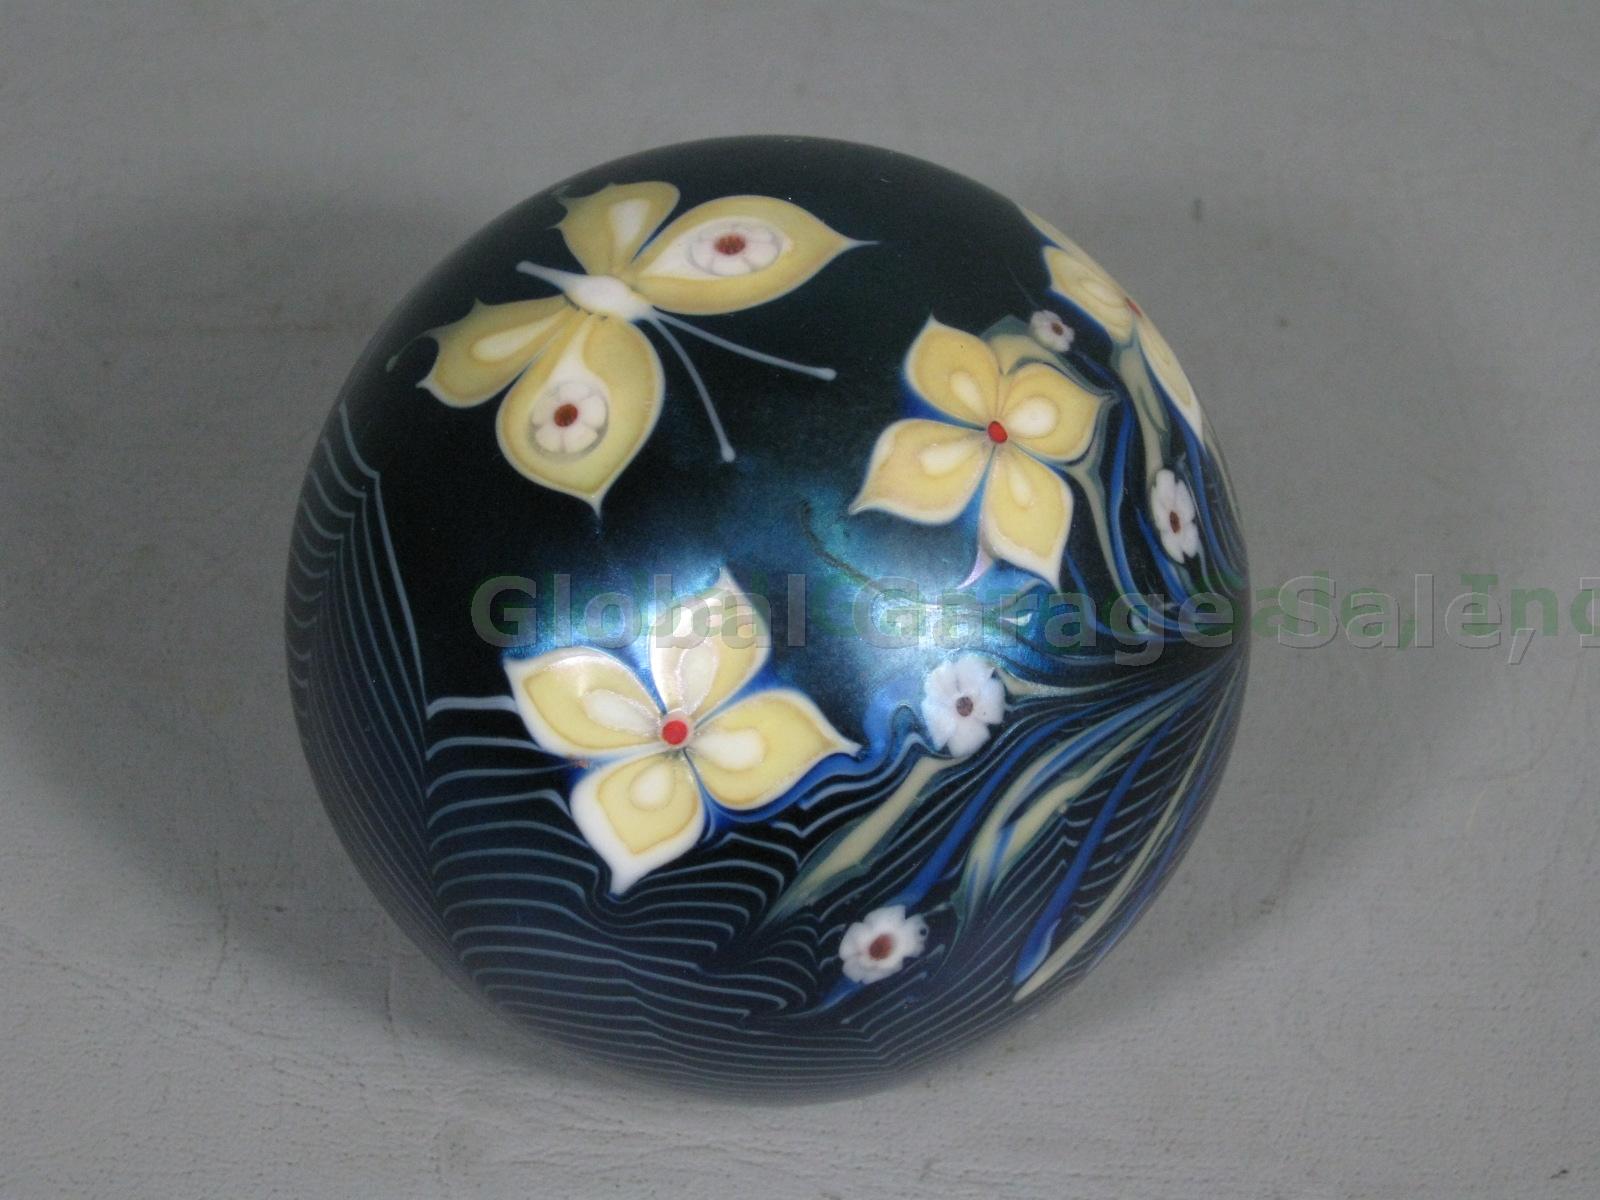 Grant Randolph Studios Signed Art Glass Paperweight Butterfly Flowers 80/4791 NR